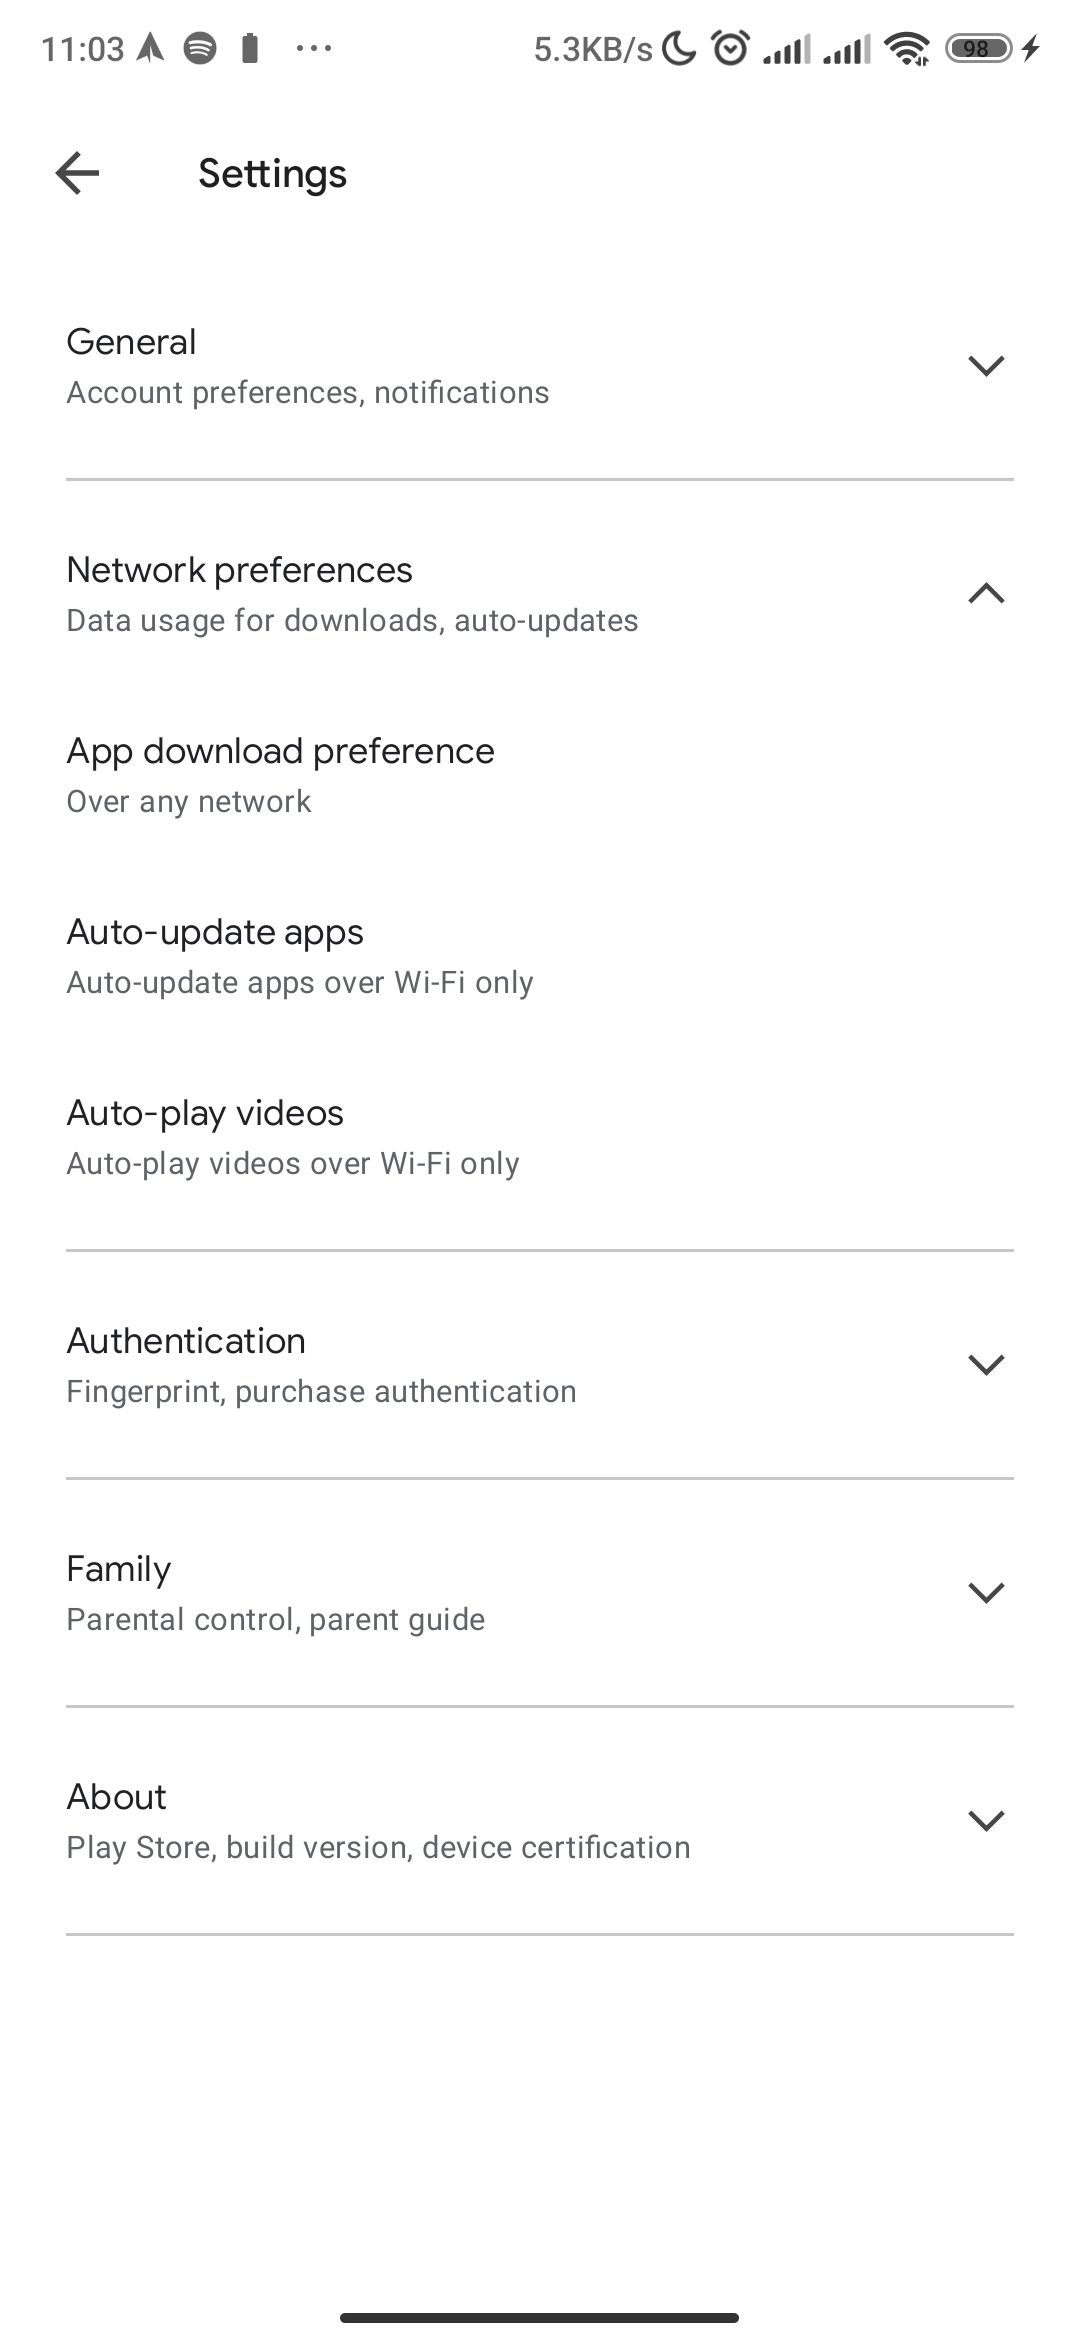 A screenshot of Google Play Store's settings page